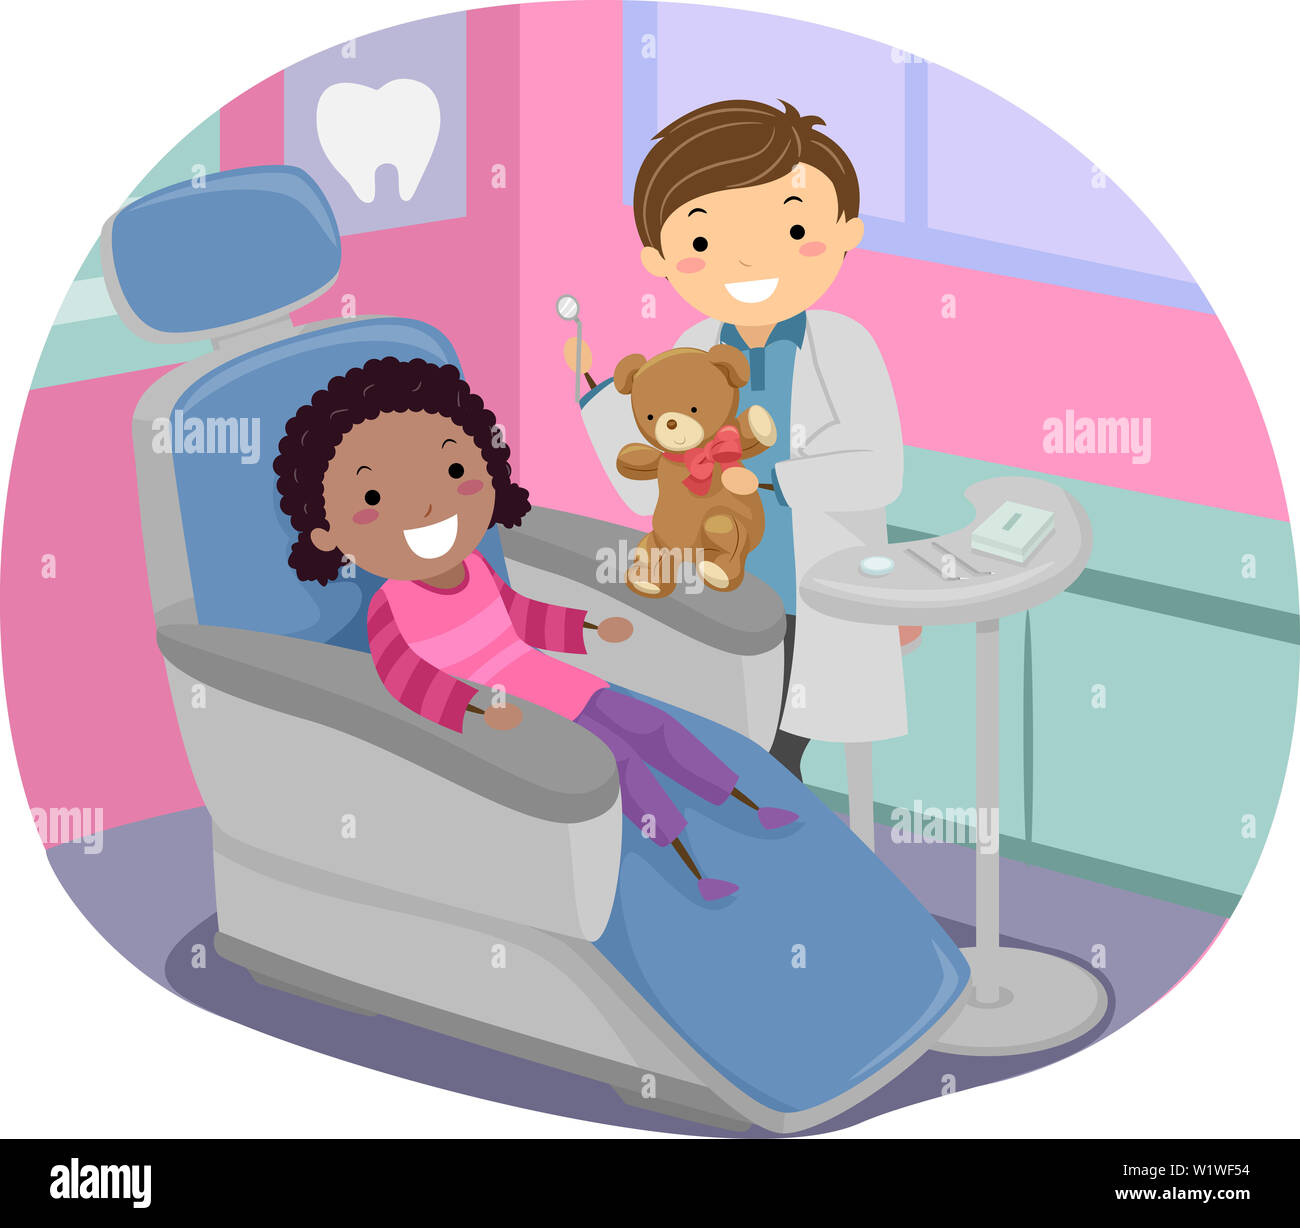 Illustration of a Stickman African American Kid Girl Sitting on a Dentist Chair with Her Dentist Holding Teddy Bear Toy Stock Photo